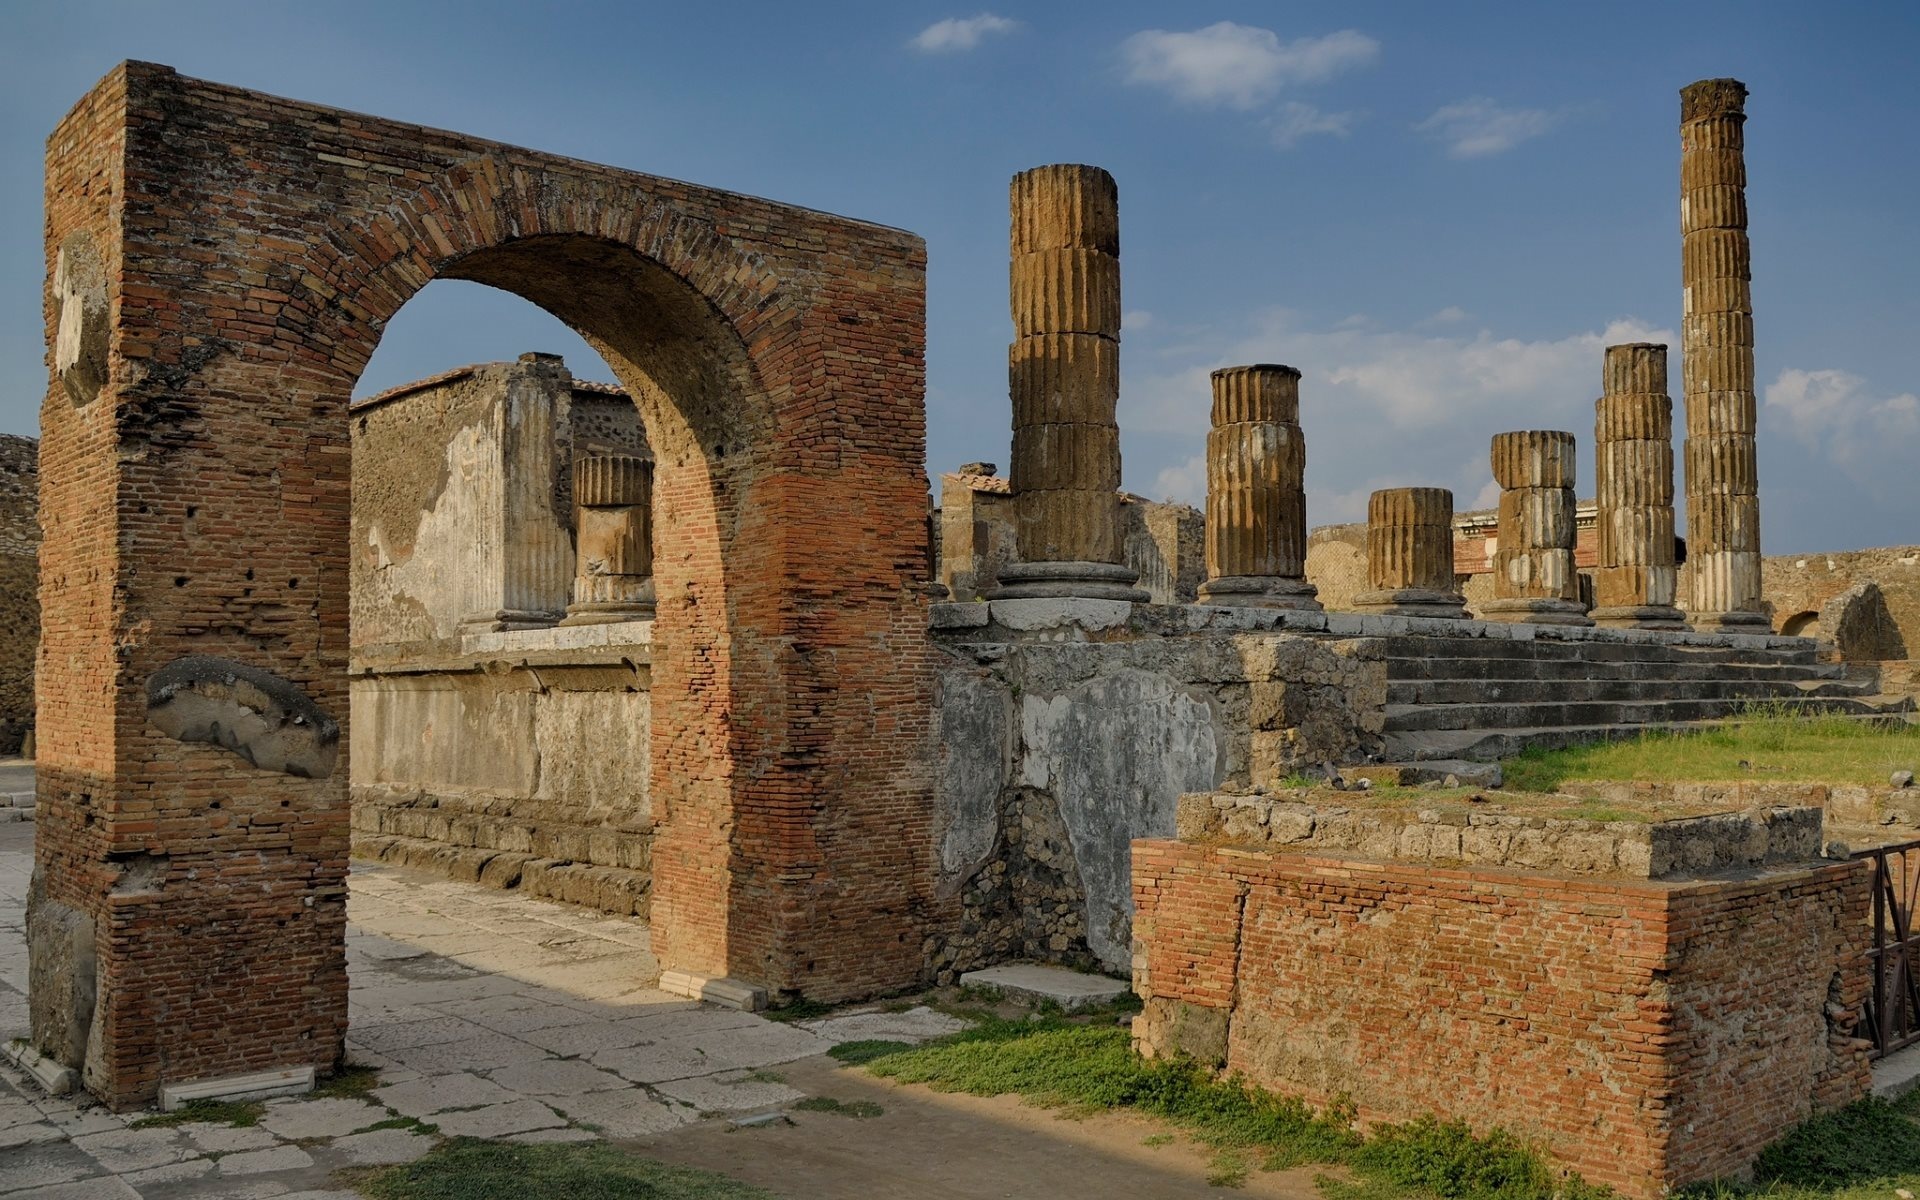 Ruins of Pompeii, Ancient architecture, Italy, High-quality pictures, 1920x1200 HD Desktop